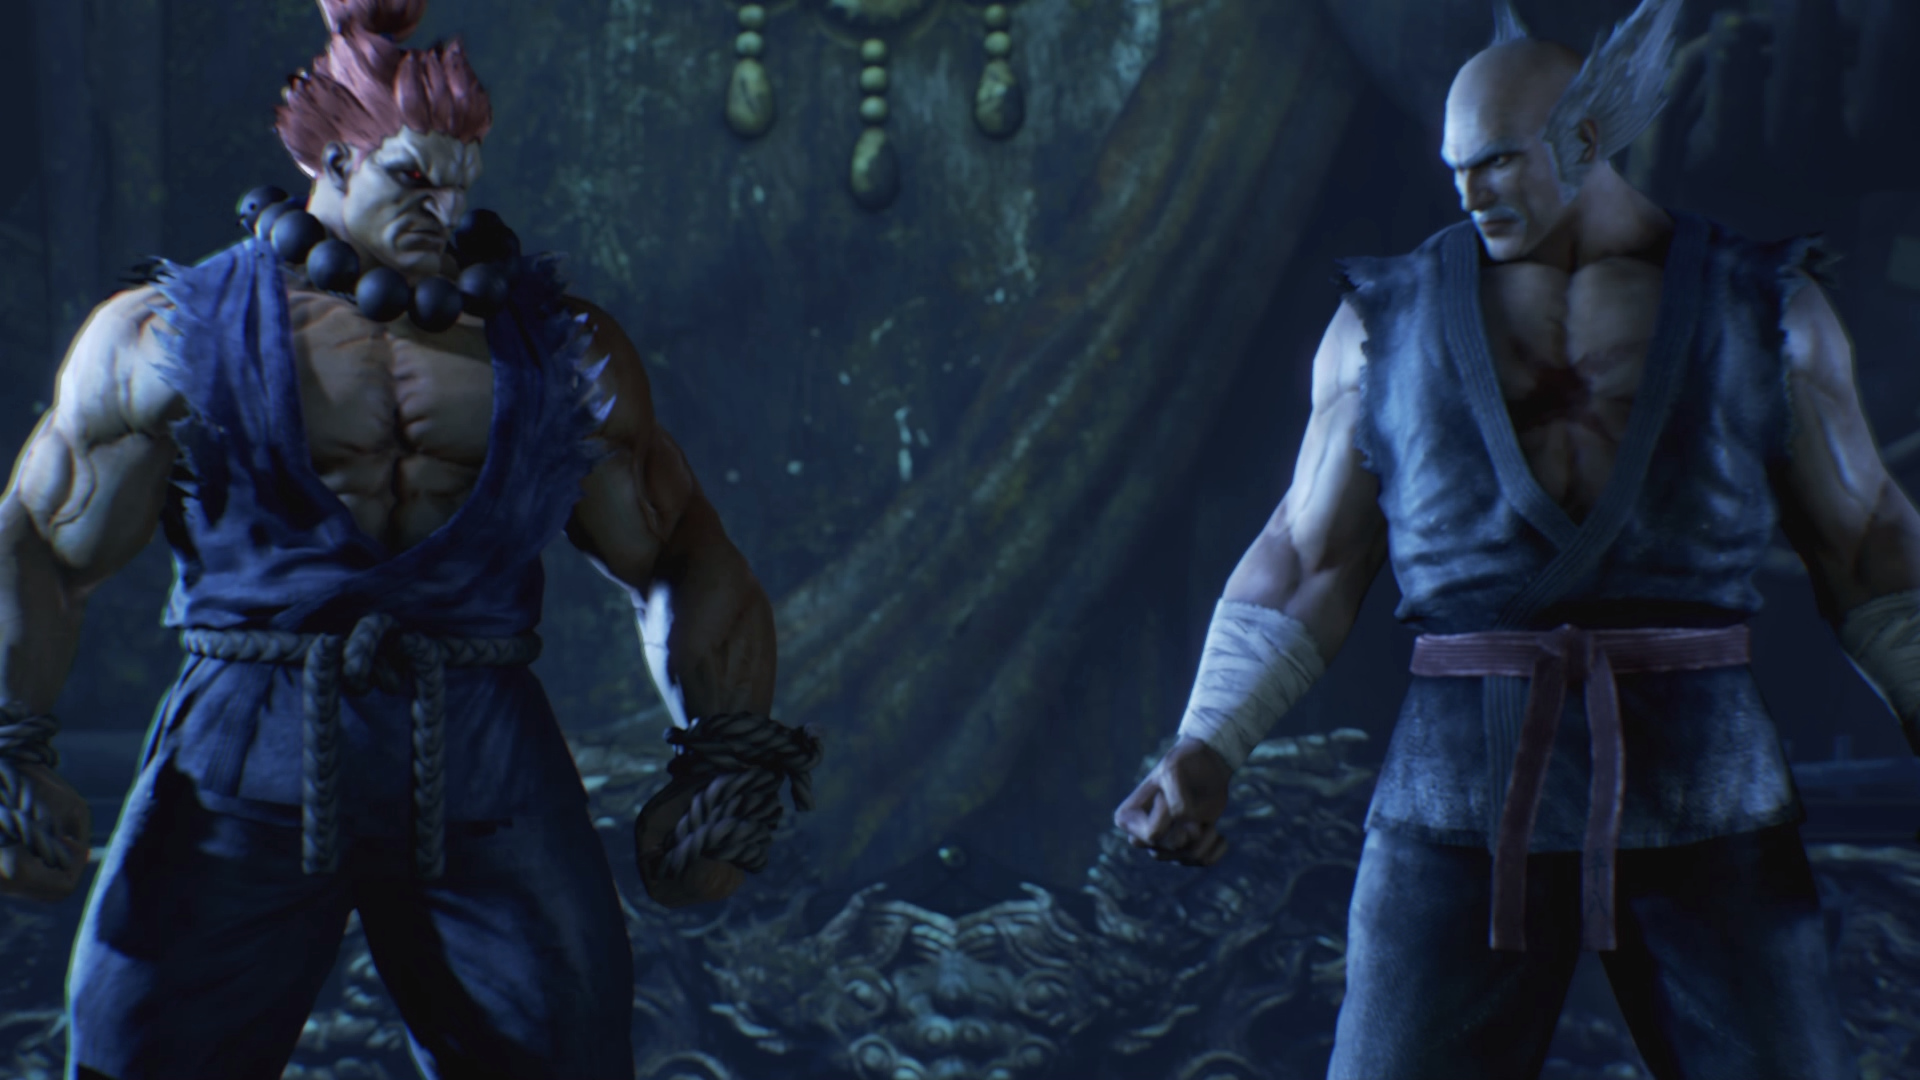 Akuma is somewhat central to the story.